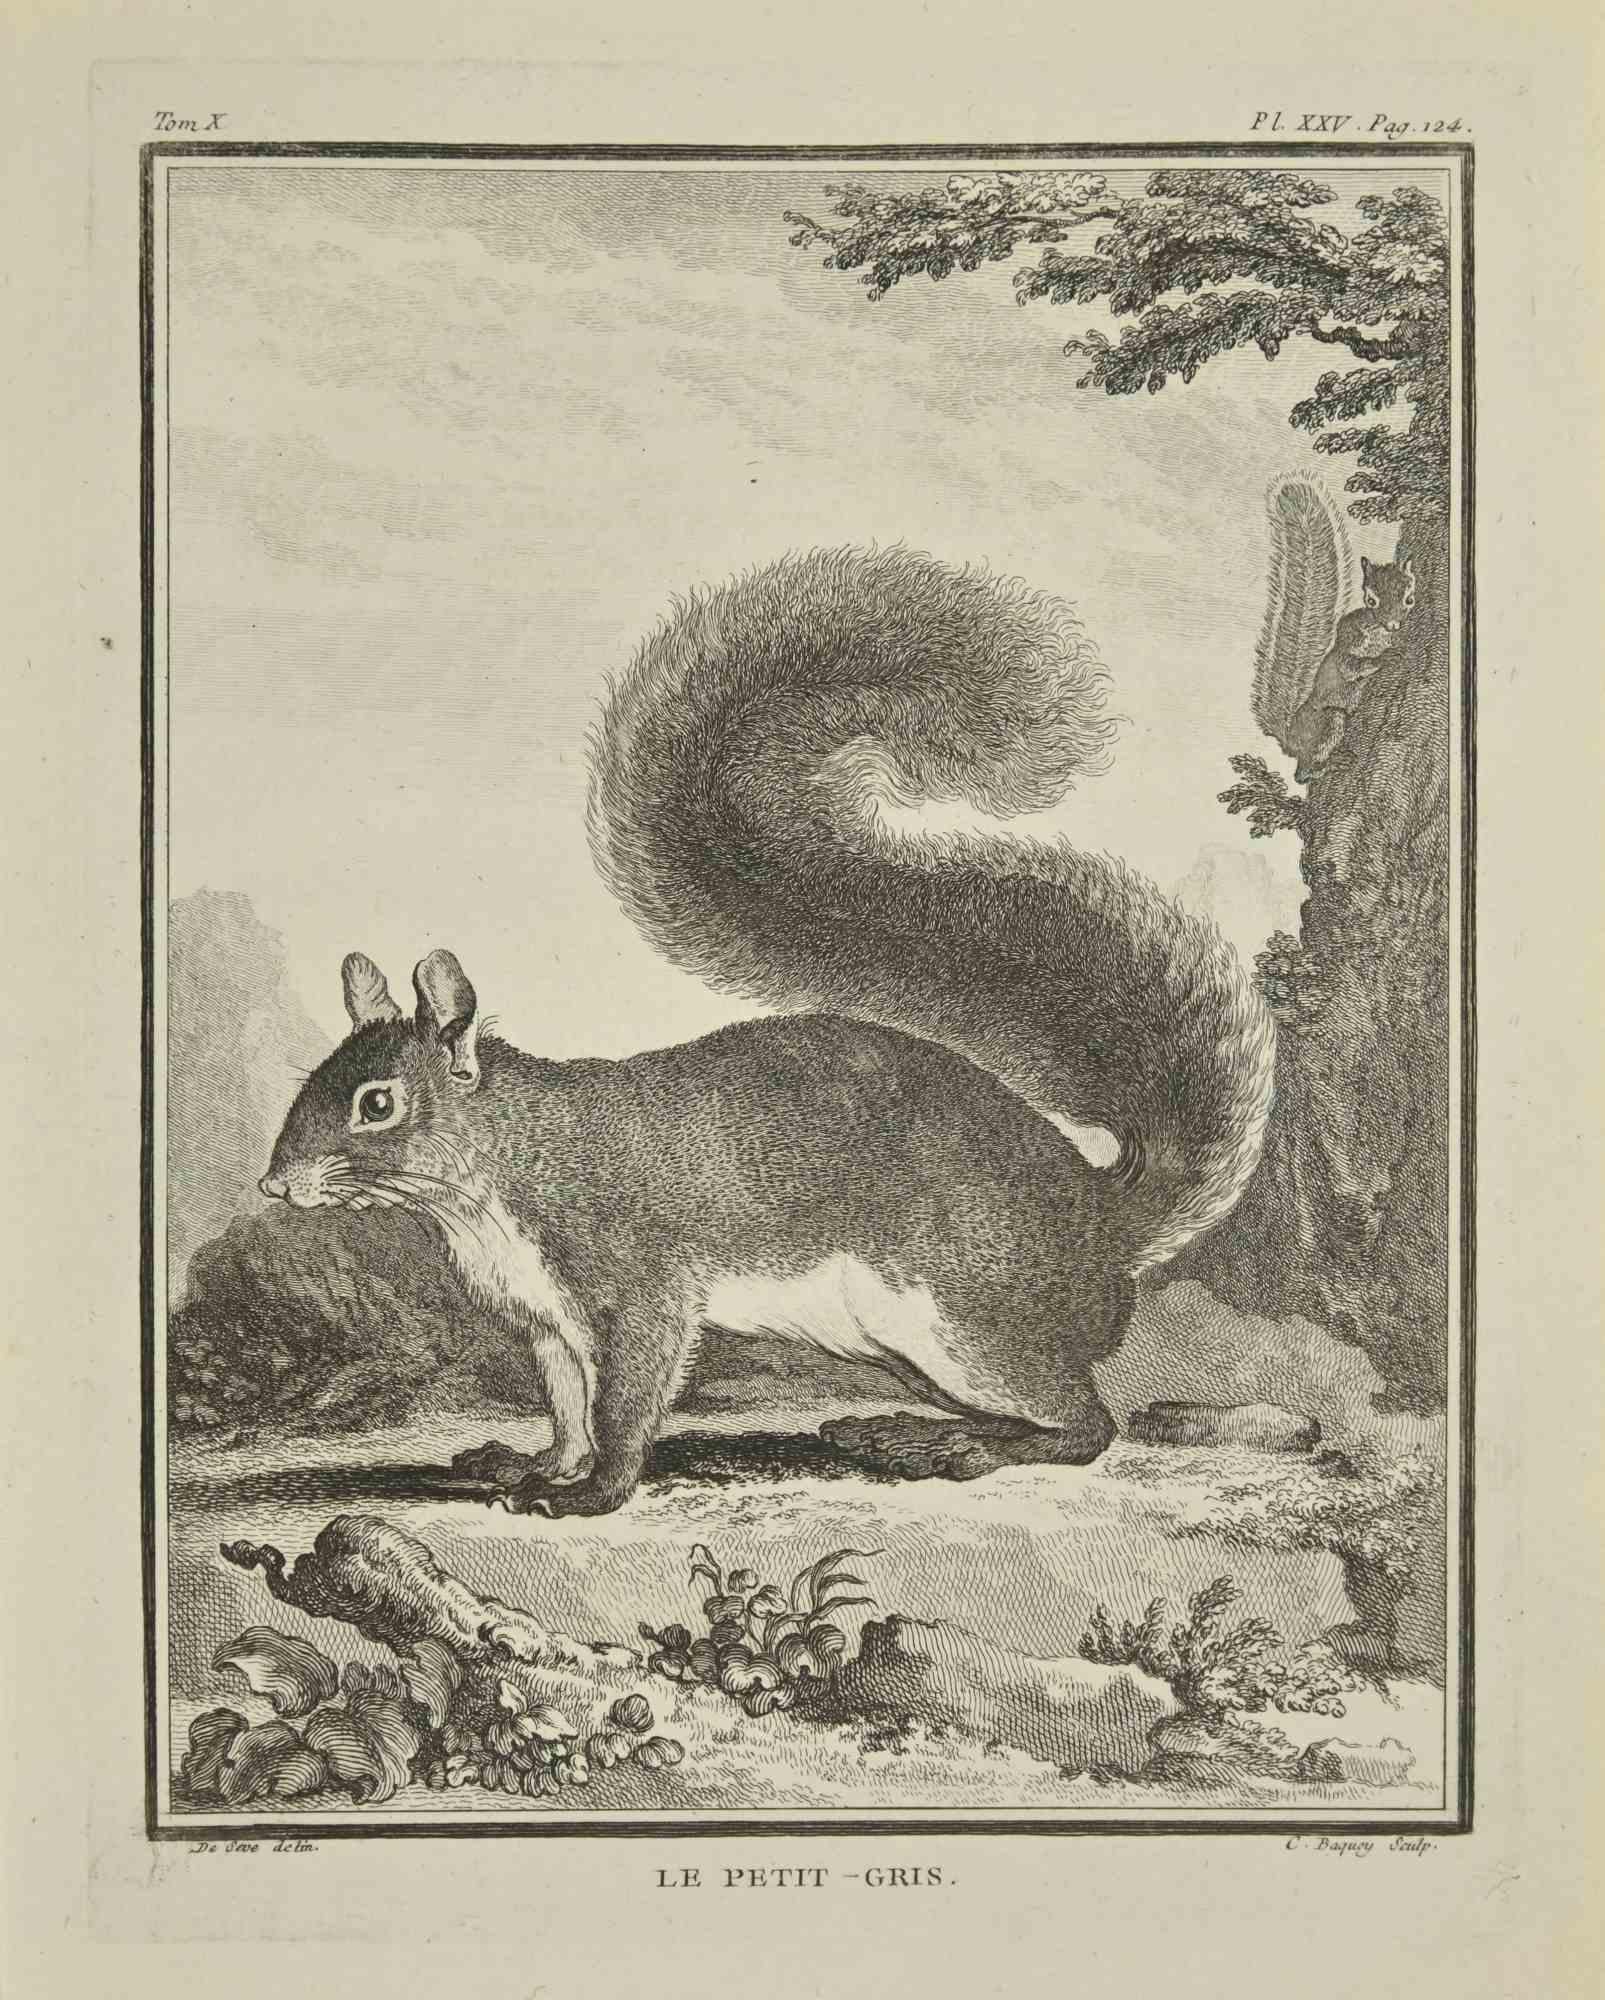 Le Petit is an etching realized by Jean Charles Baquoy in 1771.

It belongs to the suite "Histoire Naturelle de Buffon".

The Artist's signature is engraved lower right.

Good conditions.